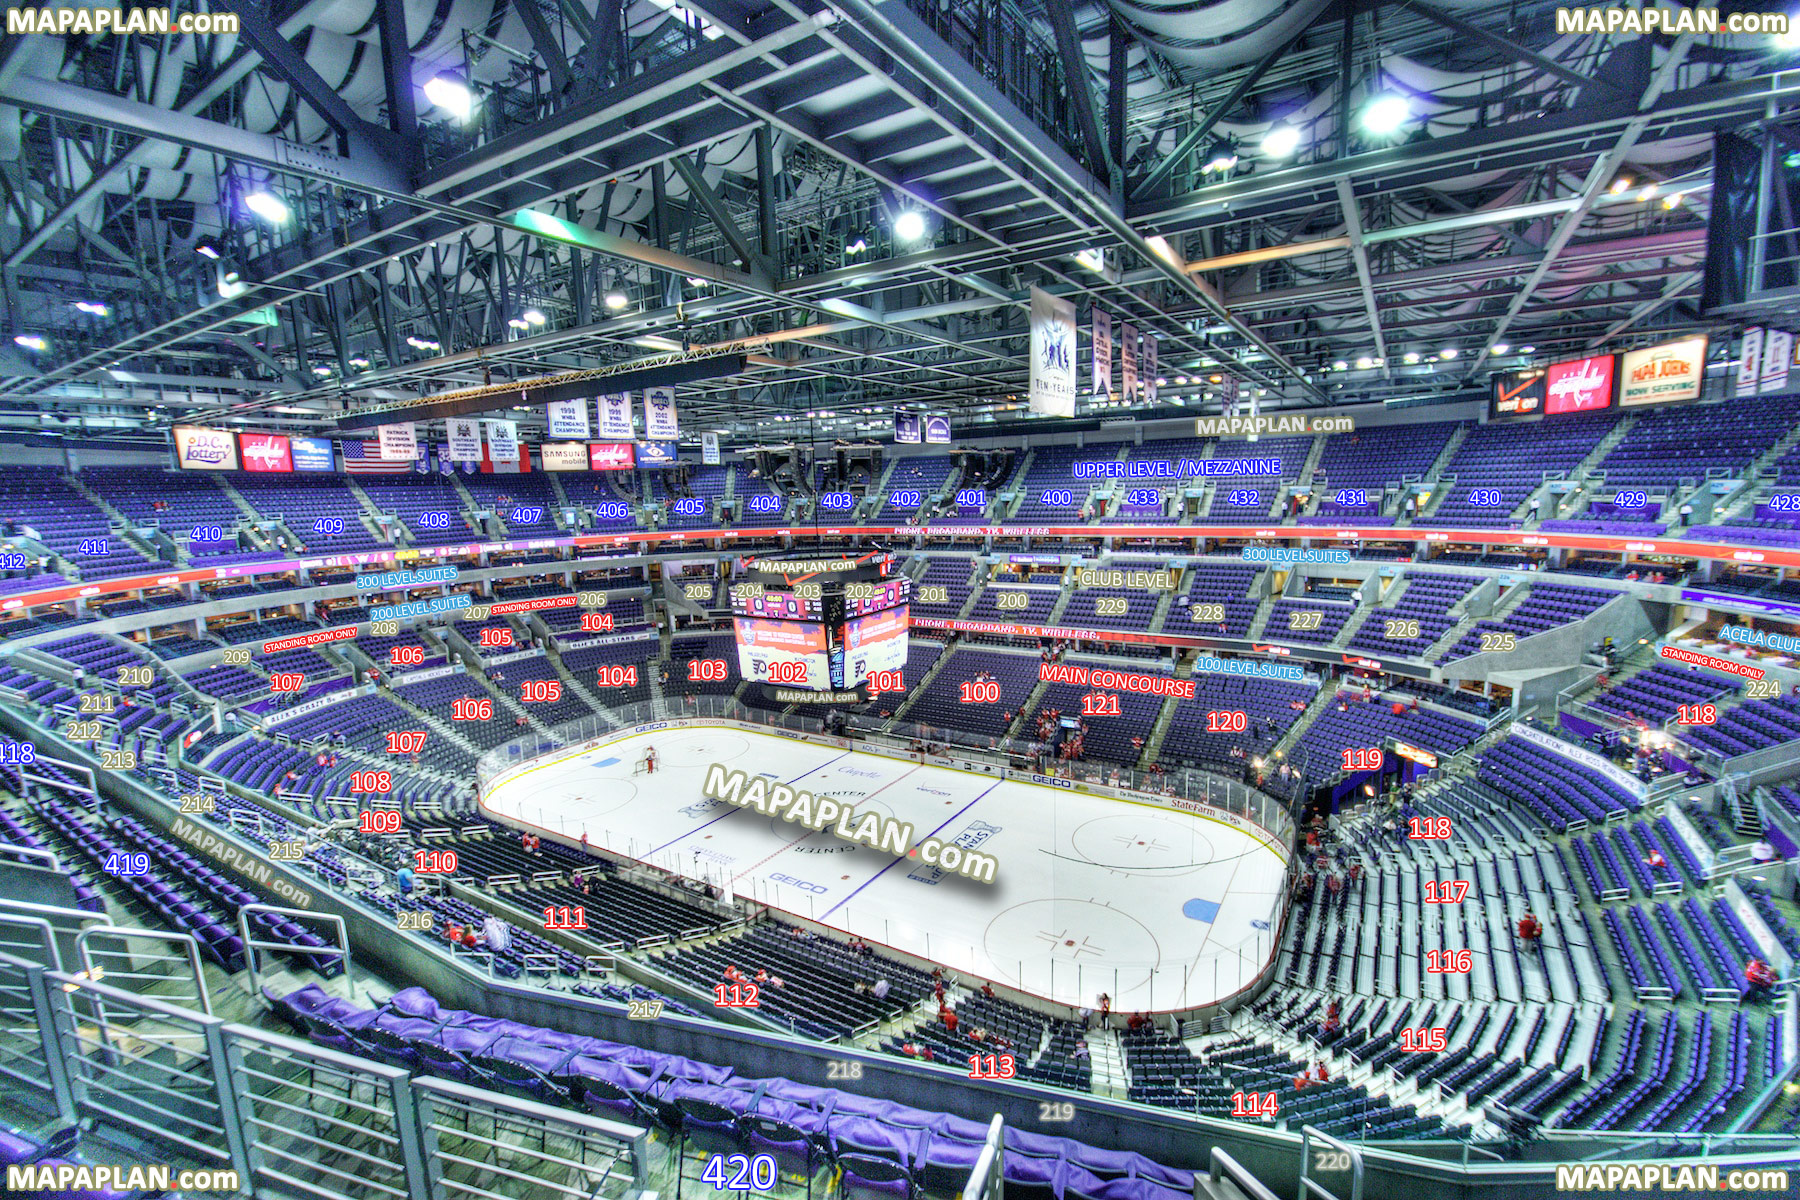 view section 420 row j seat 16 caps stadium setup image interior area arrangement sro standing room only Washington DC Capital One Arena Center seating chart